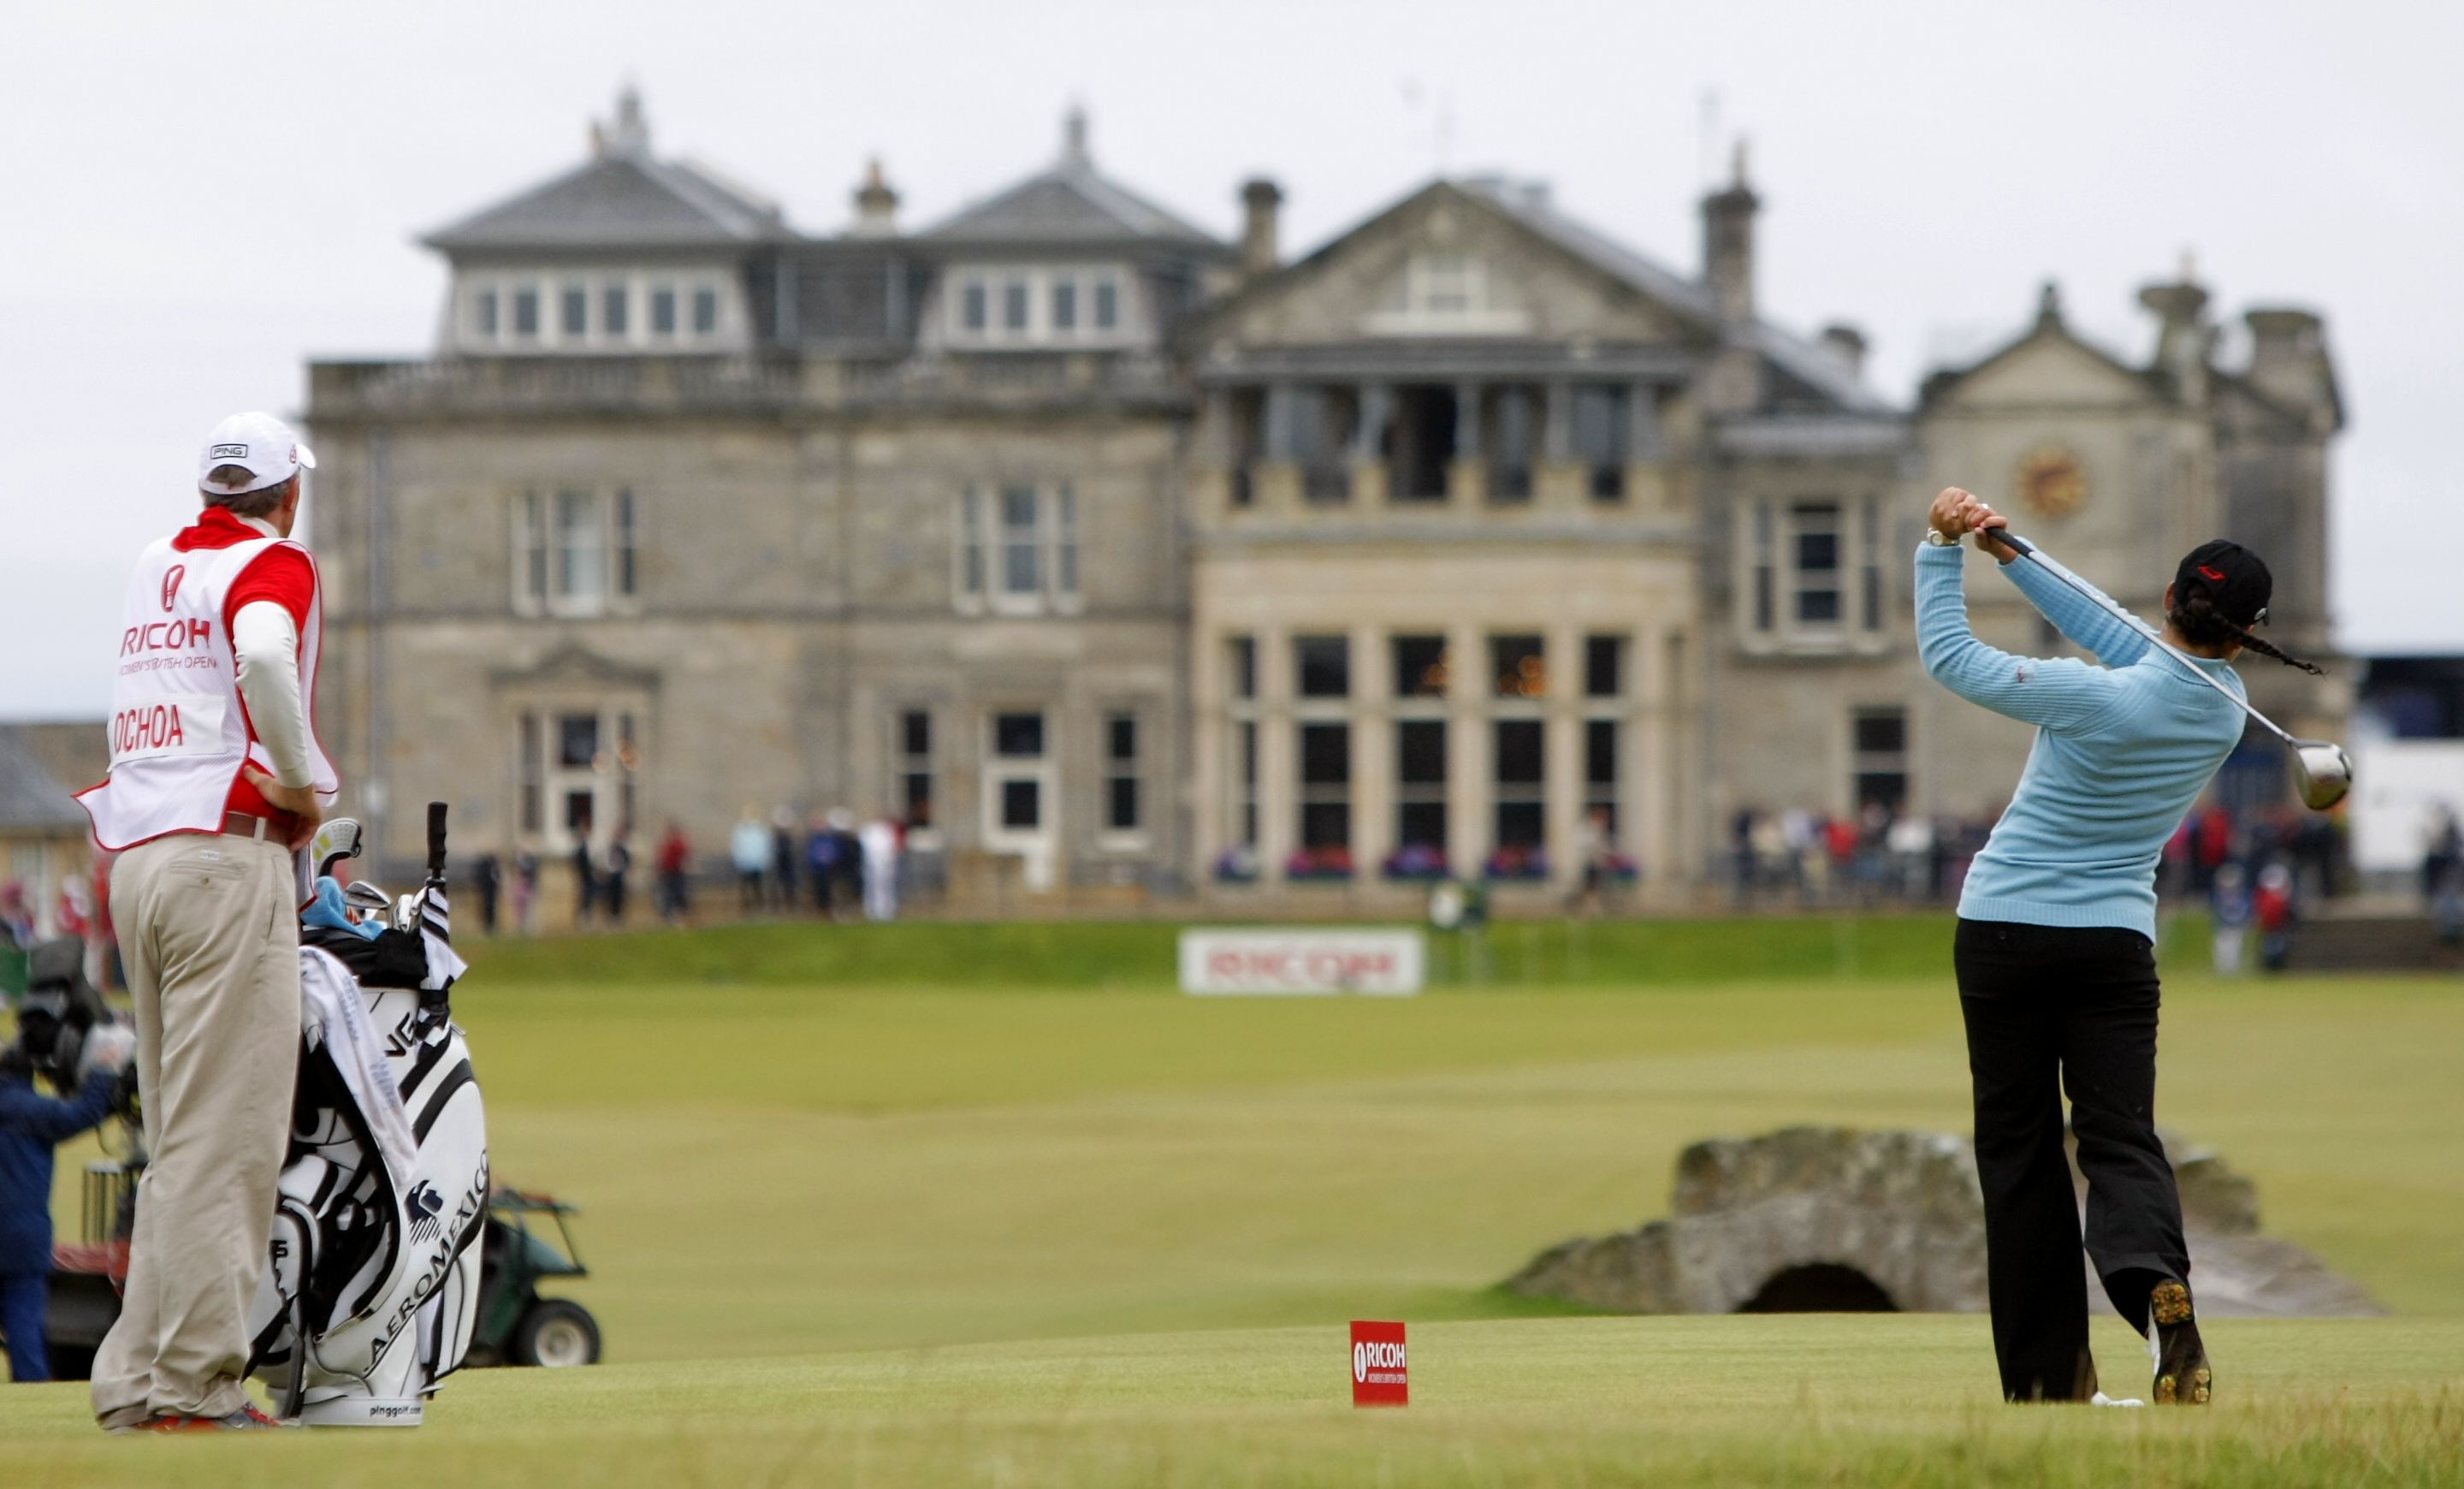 World No 1 Lorena Ochoa tees off from the 18th with the St Andrews in the background. The Women's British Open was held on the Old Course, which allows female players. Photo: AP